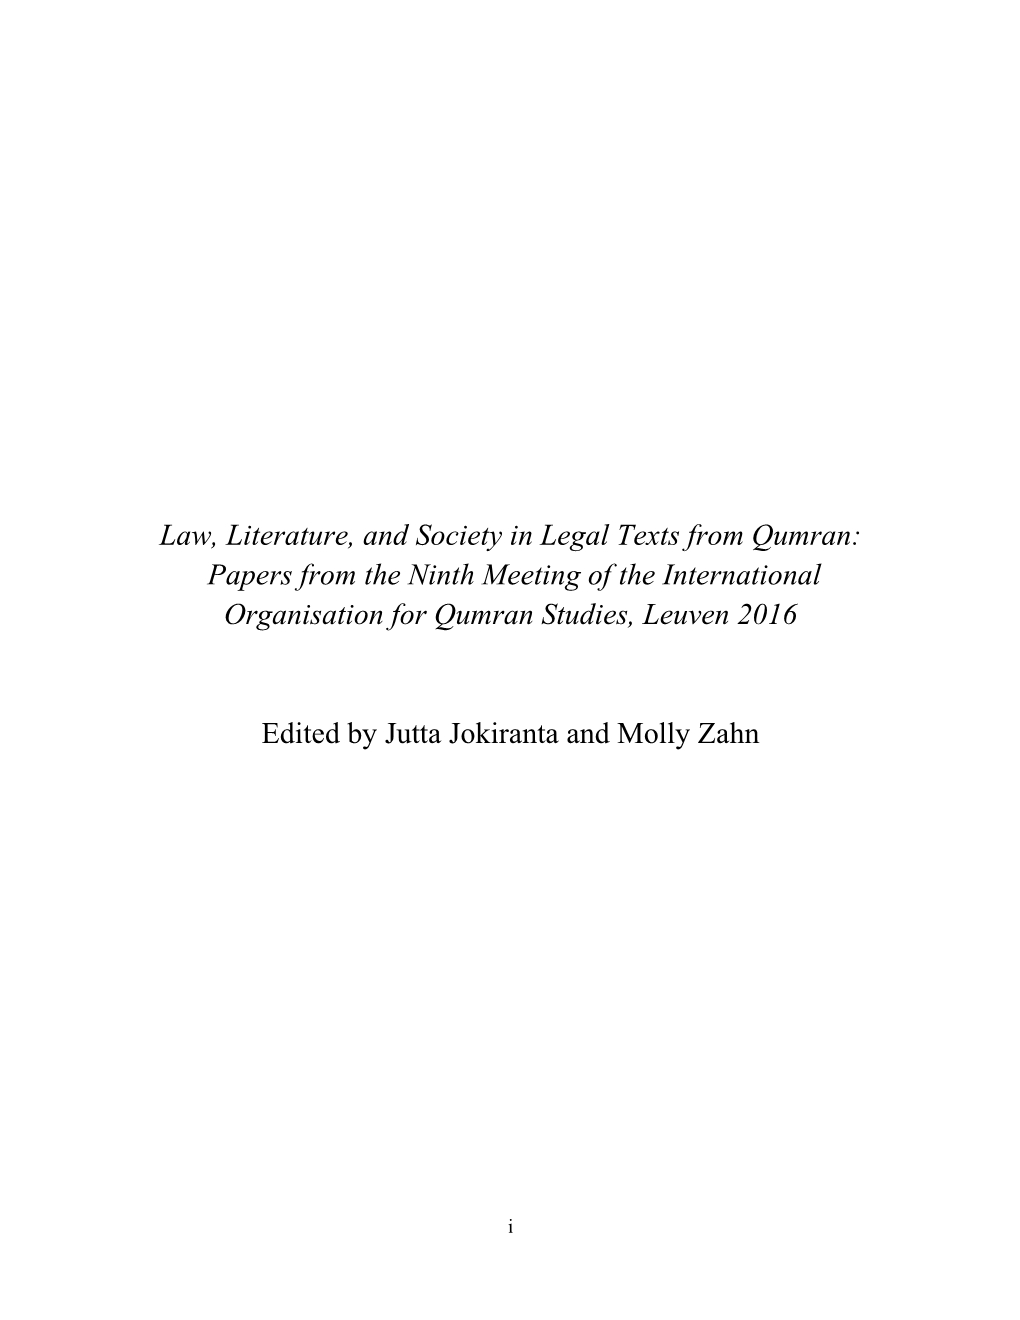 Law, Literature, and Society in Legal Texts from Qumran: Papers from the Ninth Meeting of the International Organisation for Qumran Studies, Leuven 2016